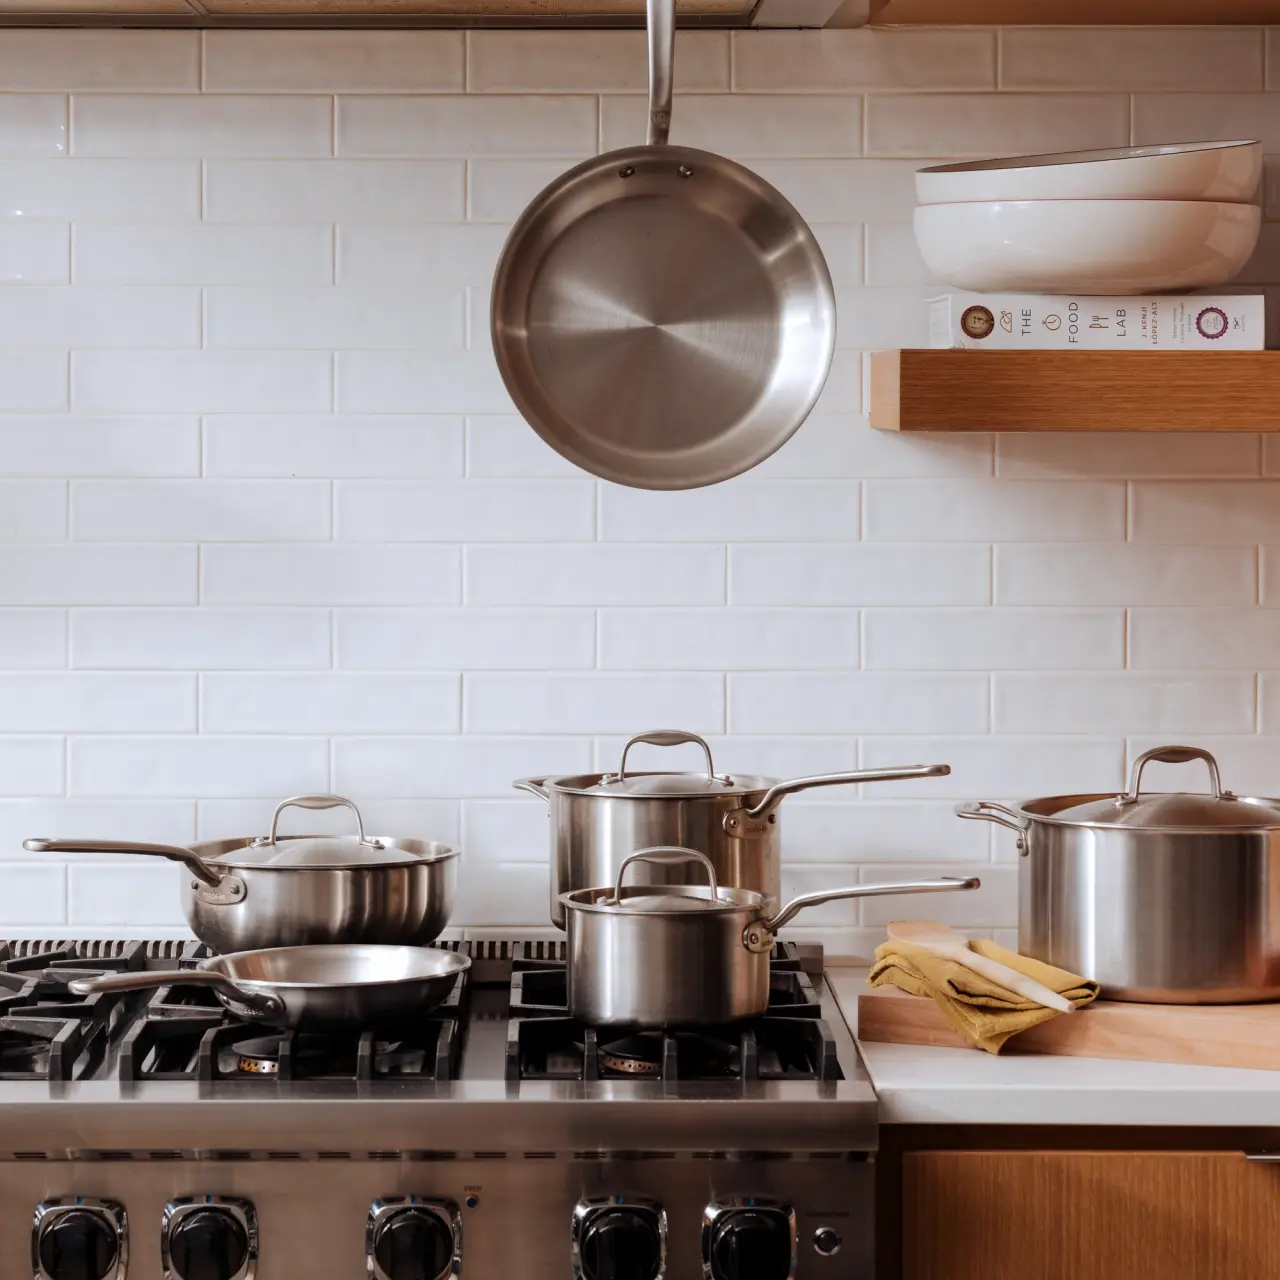 A tidy kitchen with a variety of pots on a stove and one hanging above, showcasing a clean cooking environment.